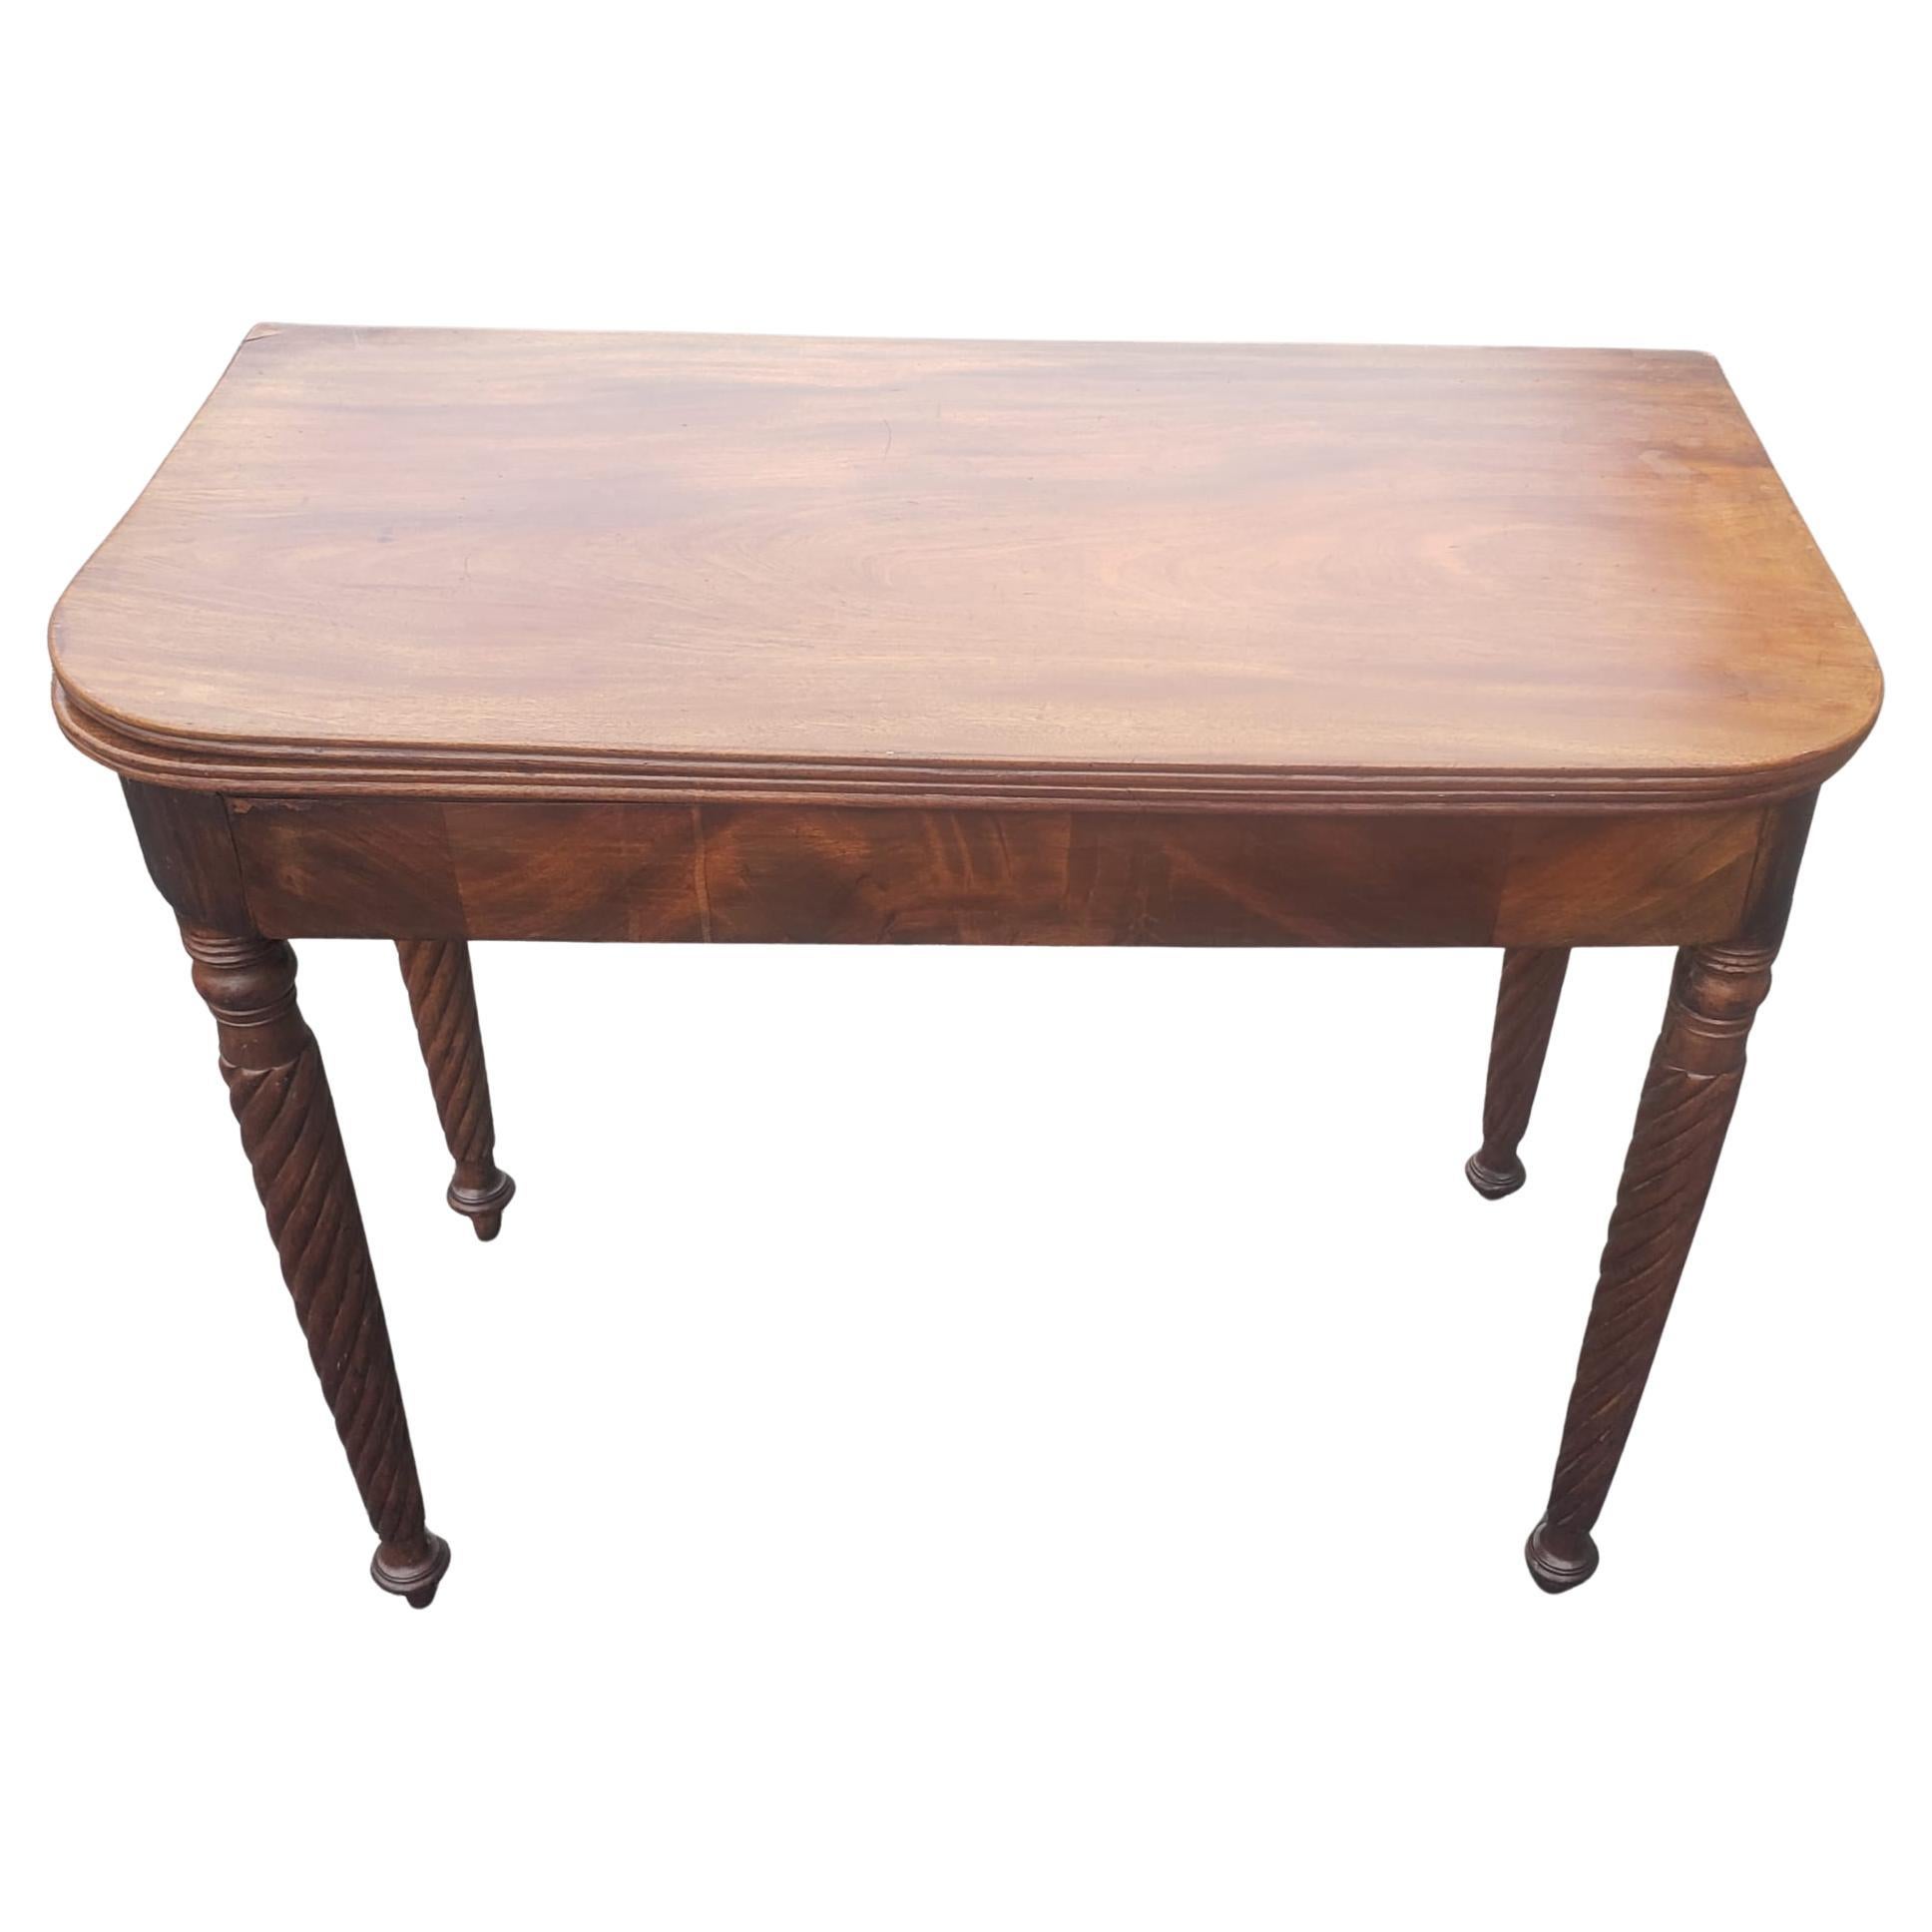 19th Century Empire Style Mahogany Fold-Top Game Table or Console Table with flame mahogany skirt. Measures 35.75